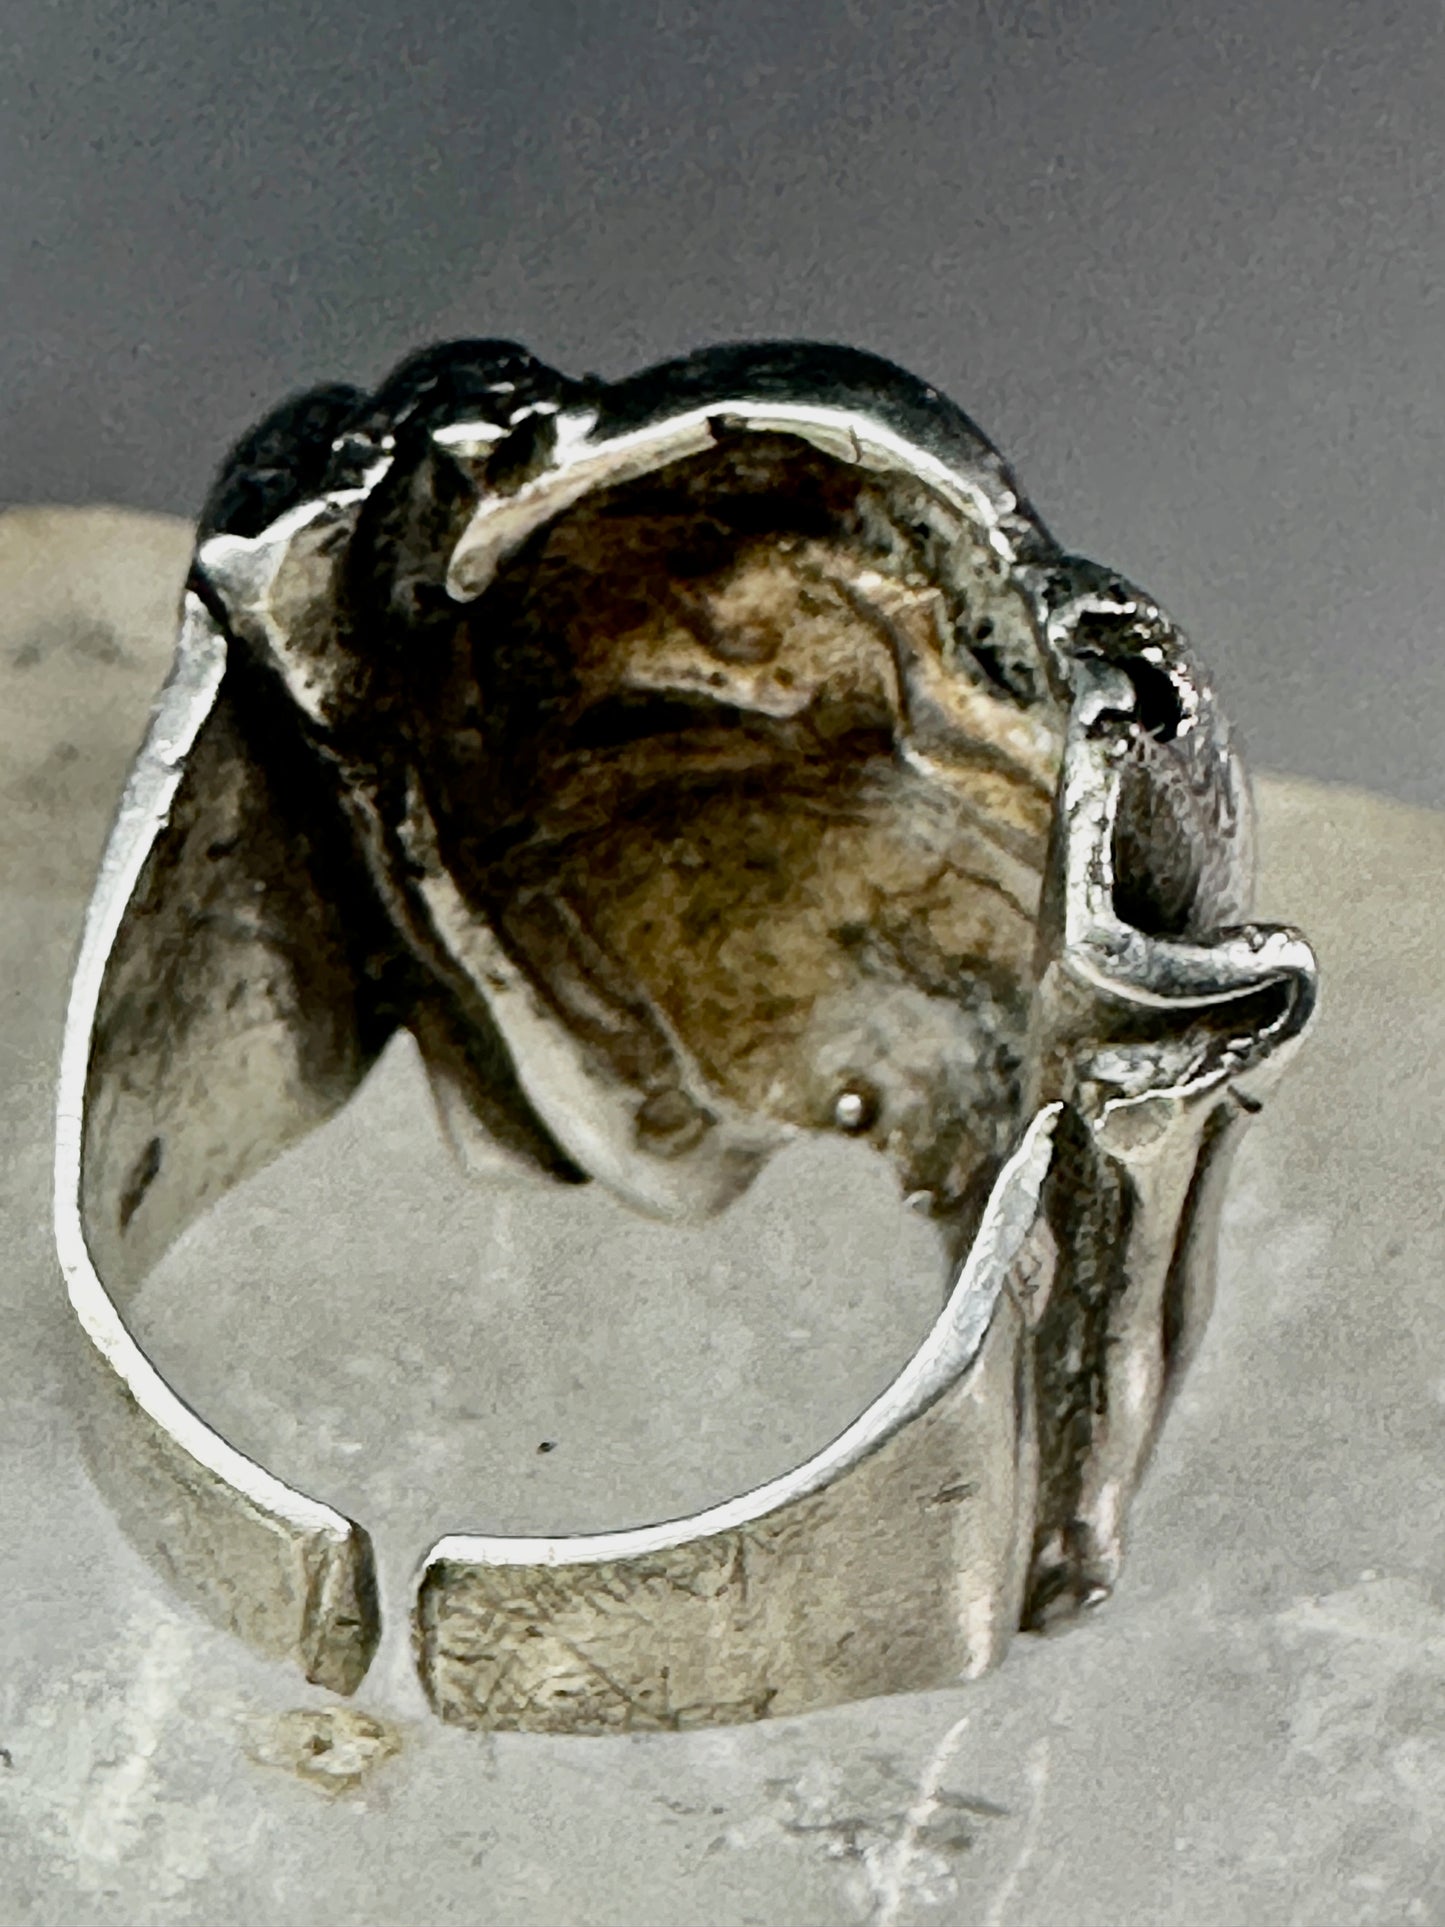 Brutalist face ring figurative band size 7 sterling silver women  AS IS